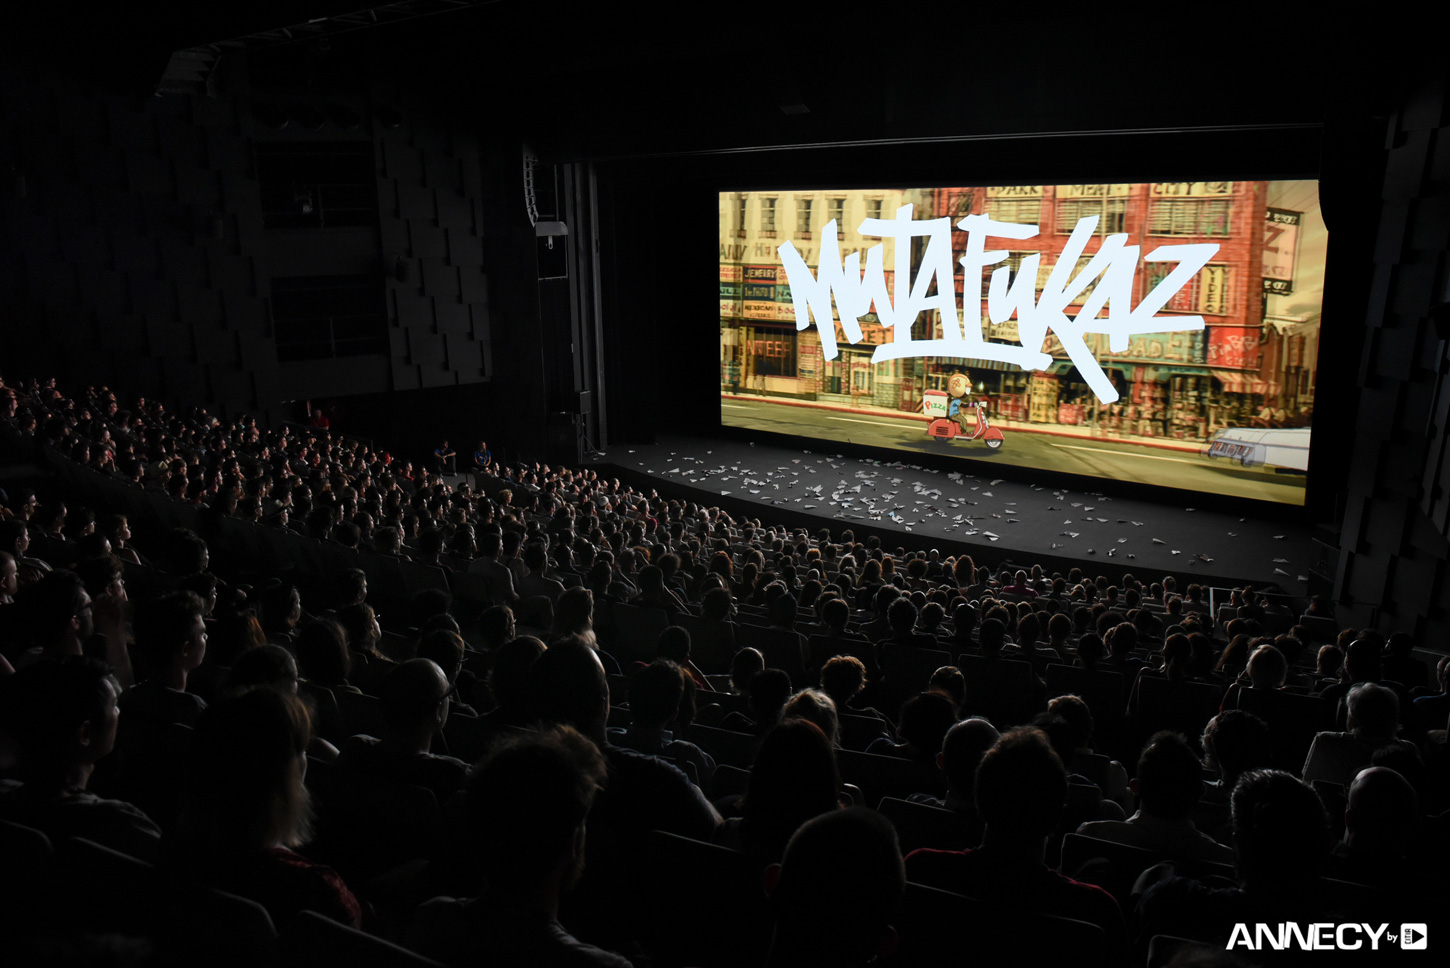 05. “Mutafukaz”, the French-Japanese co-produced animated feature (Part 1)